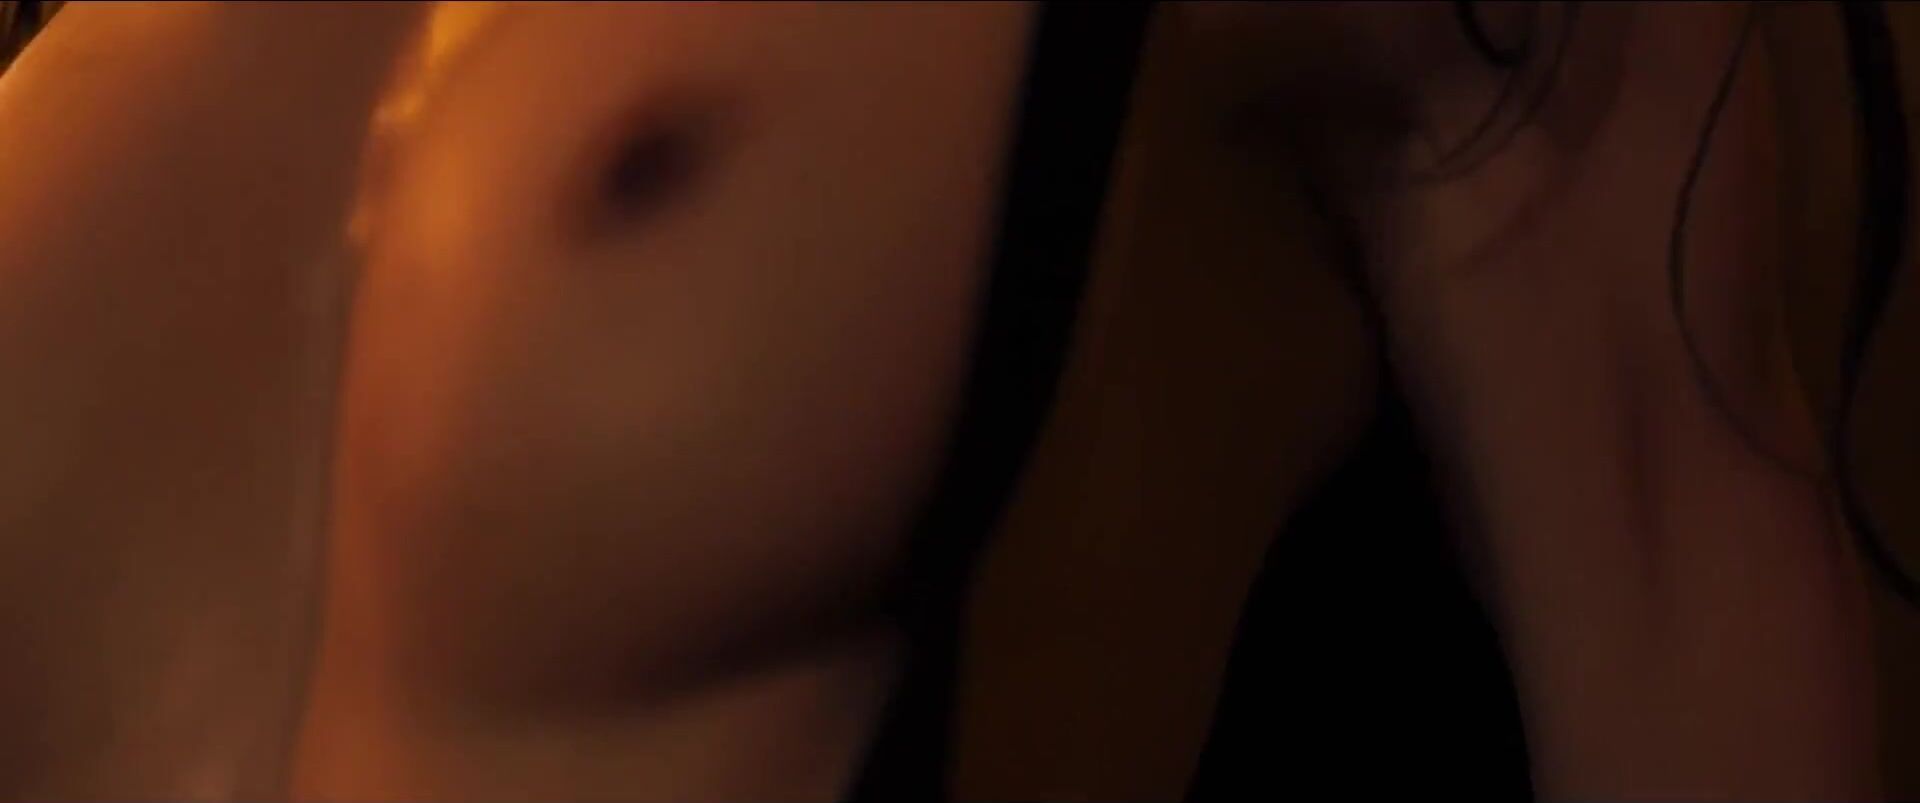 Sexy Whores Lesbian sex scene and striptease by windows from horror movie Trauma (2017) Culote